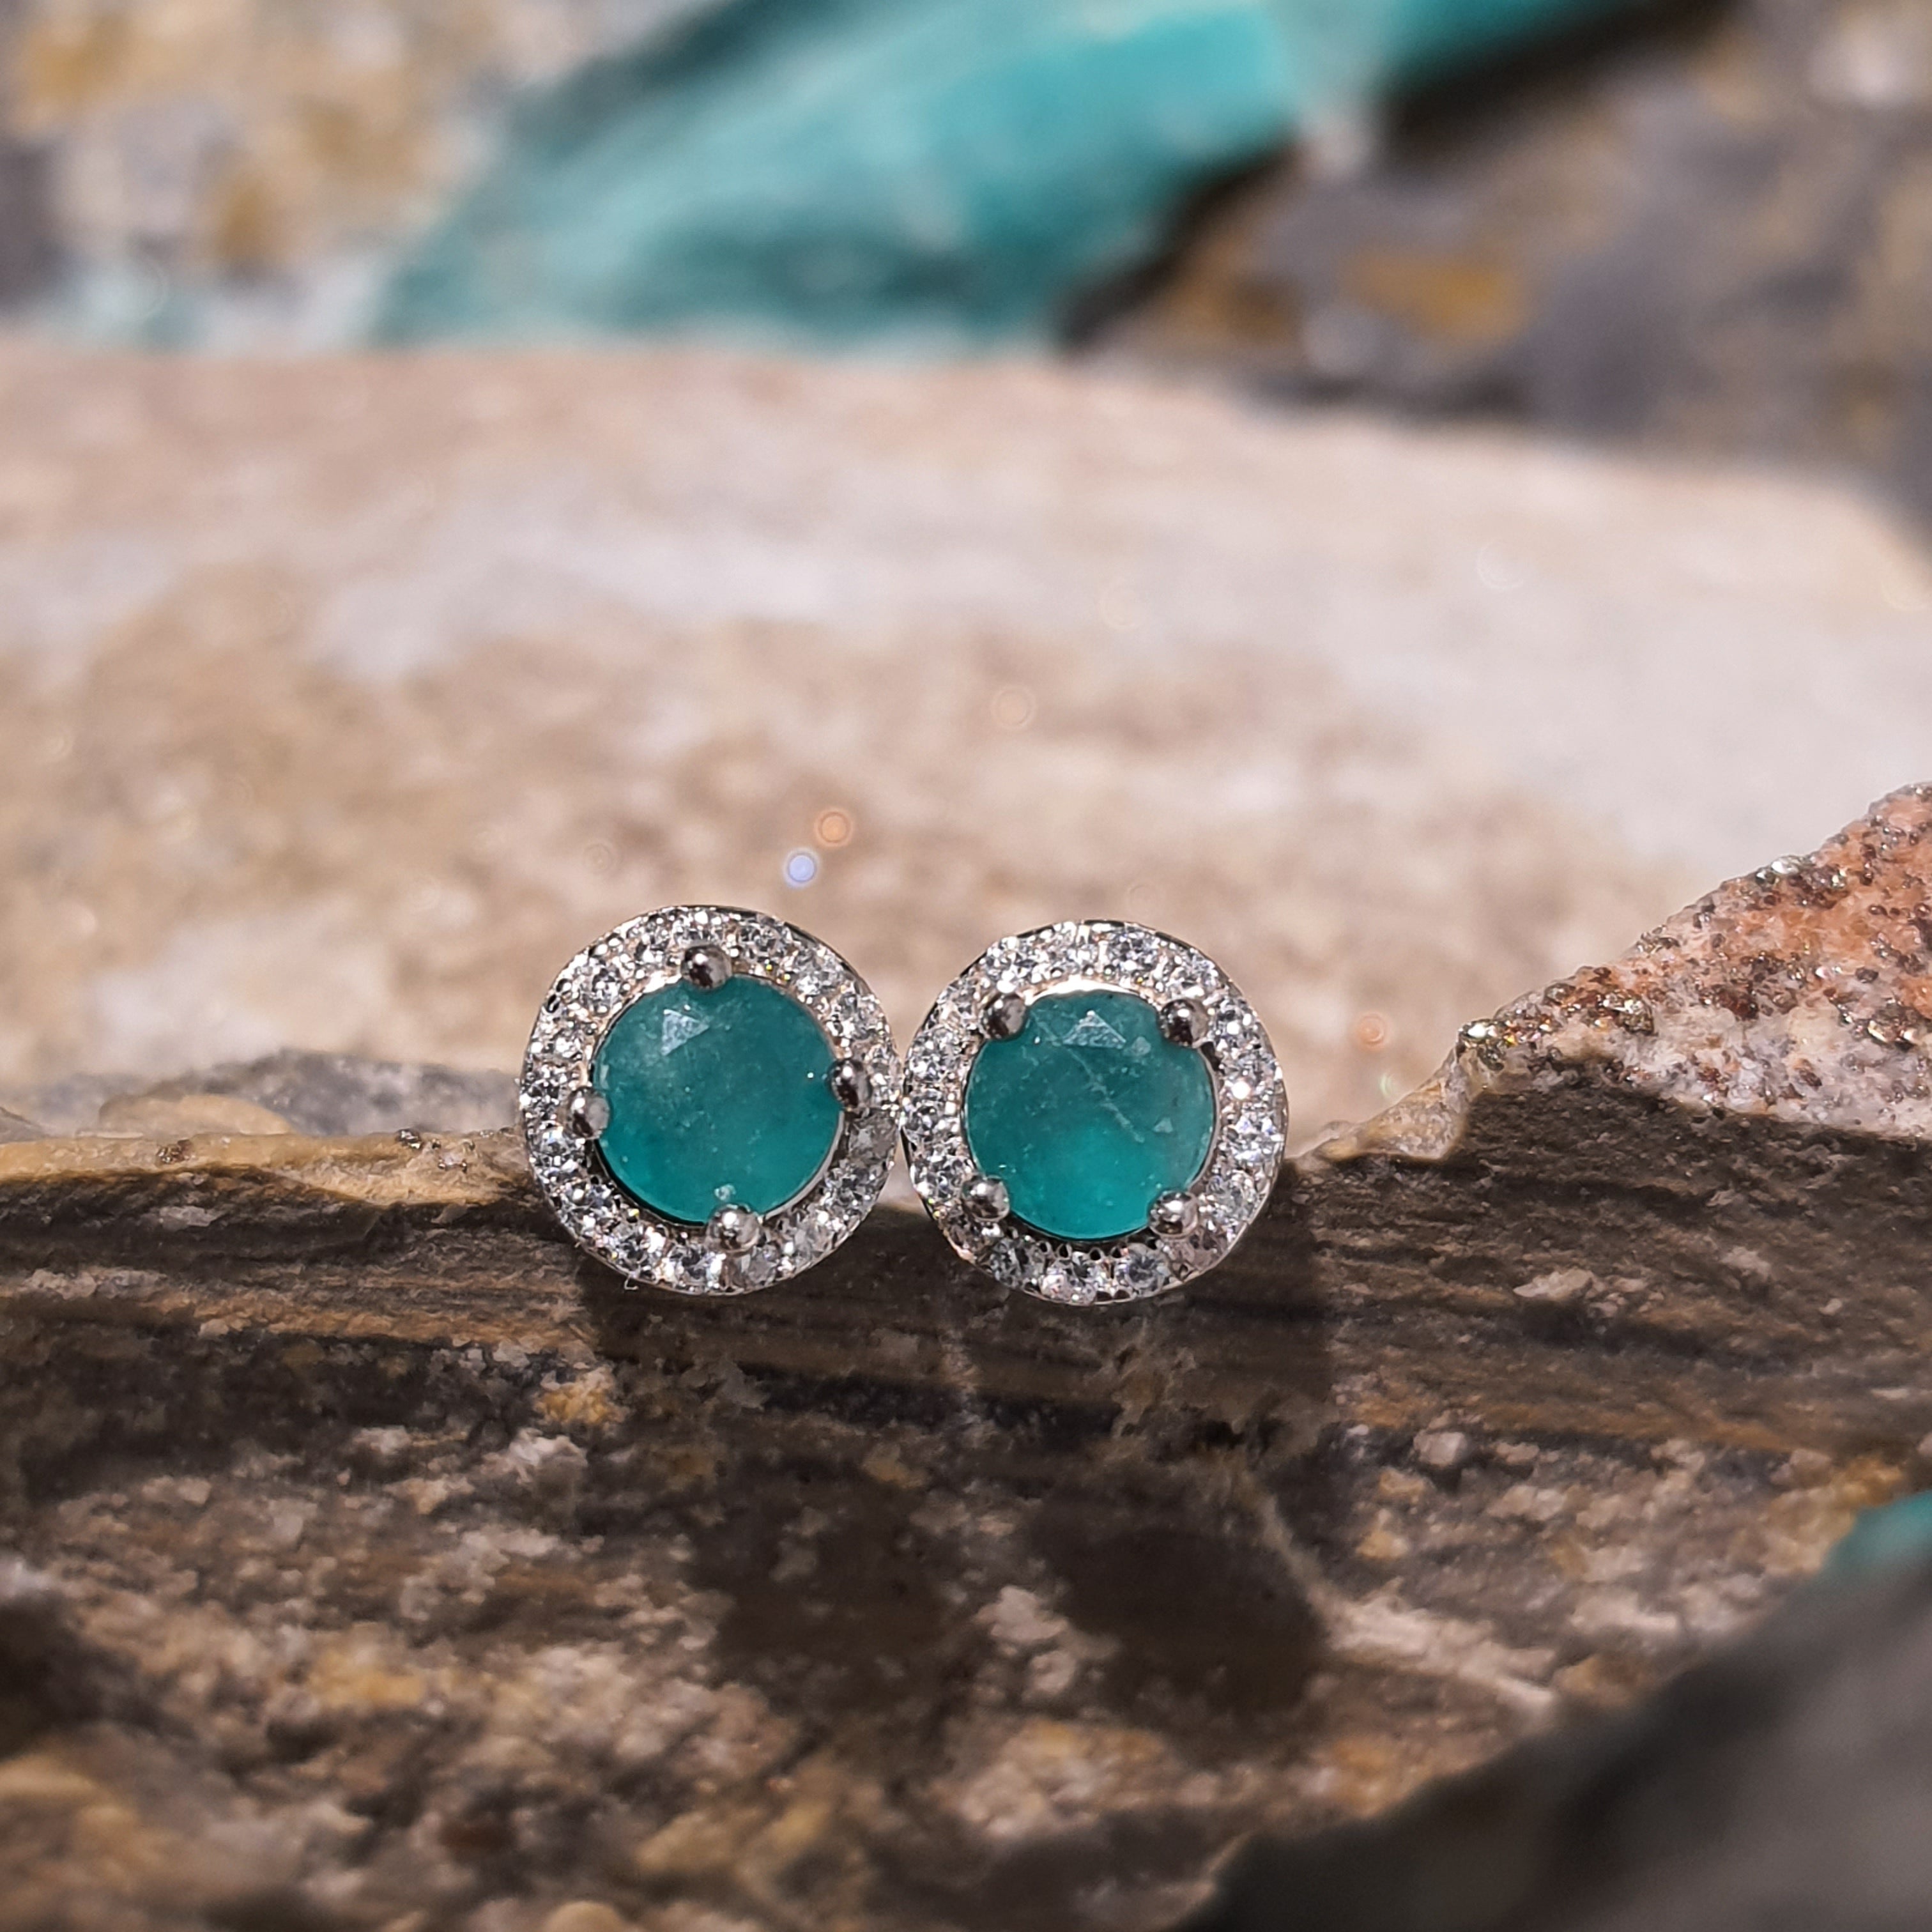 Elegant Round Sterling Silver Earrings with Central Emerald of Exceptional Color and Size